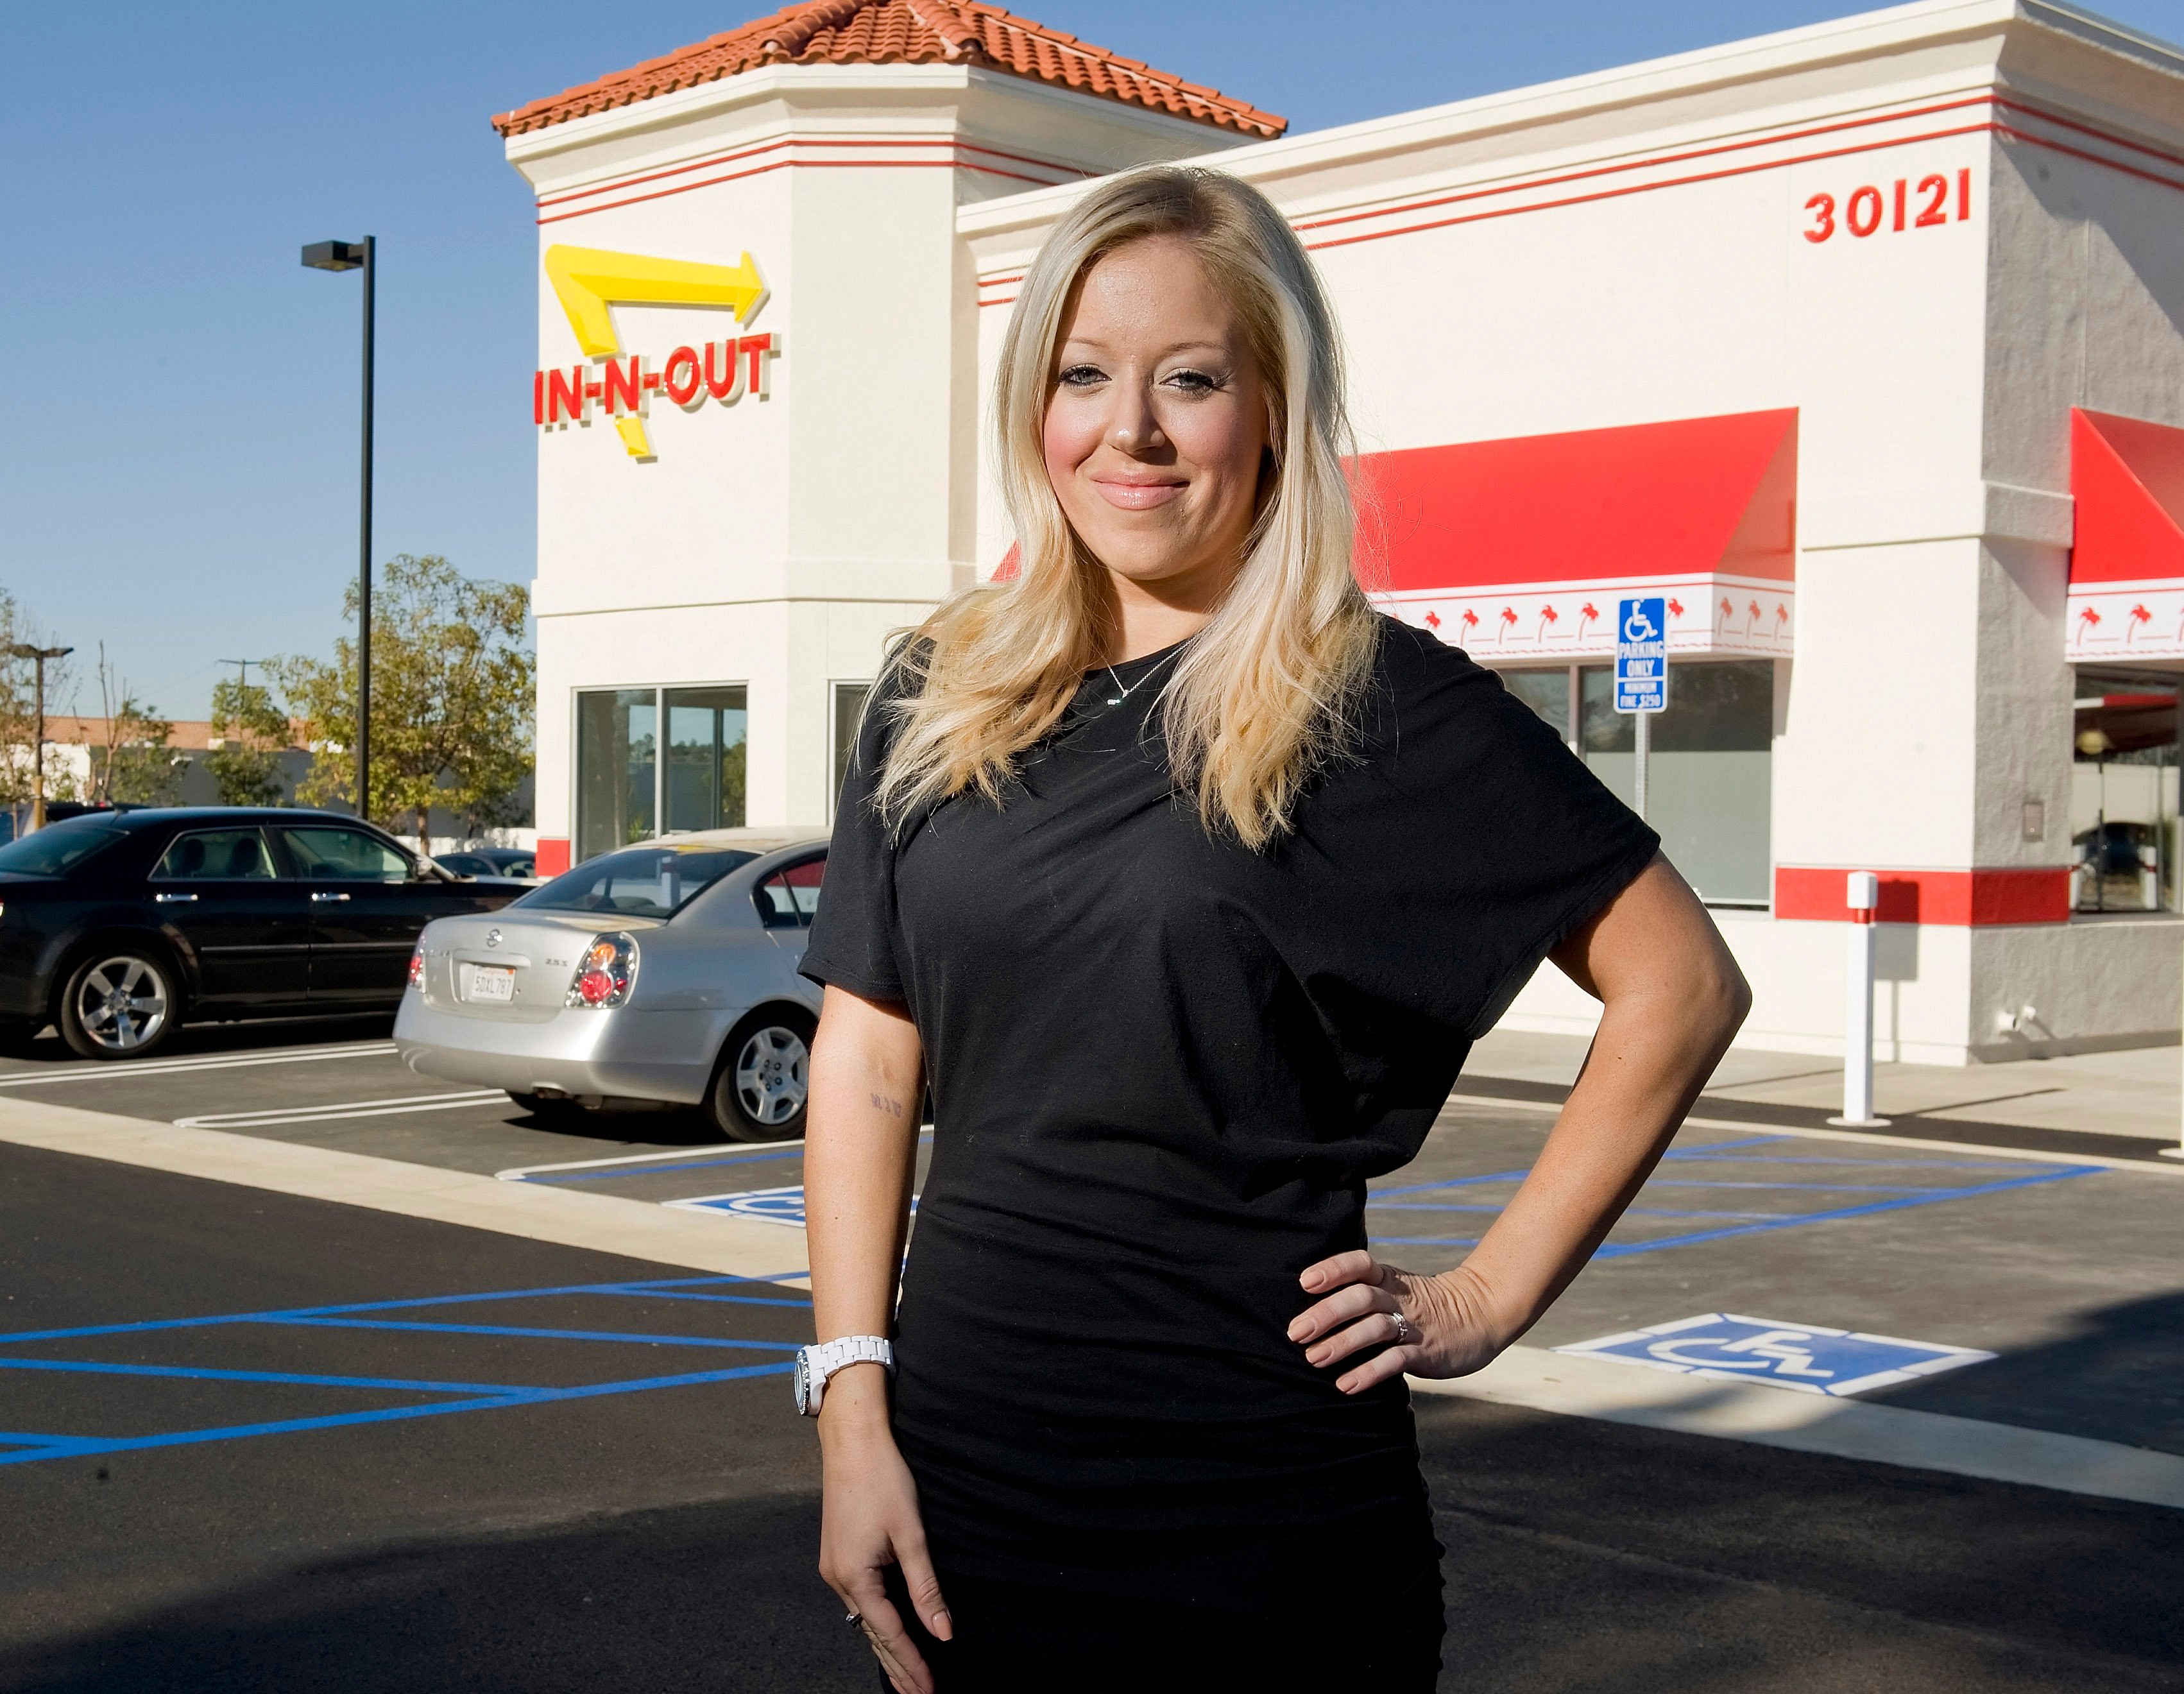 In-N-Out Burger heiress Lynsi Snyder started out working kitchen shifts at her family’s fast food chain as a teen. Photo: Getty Images